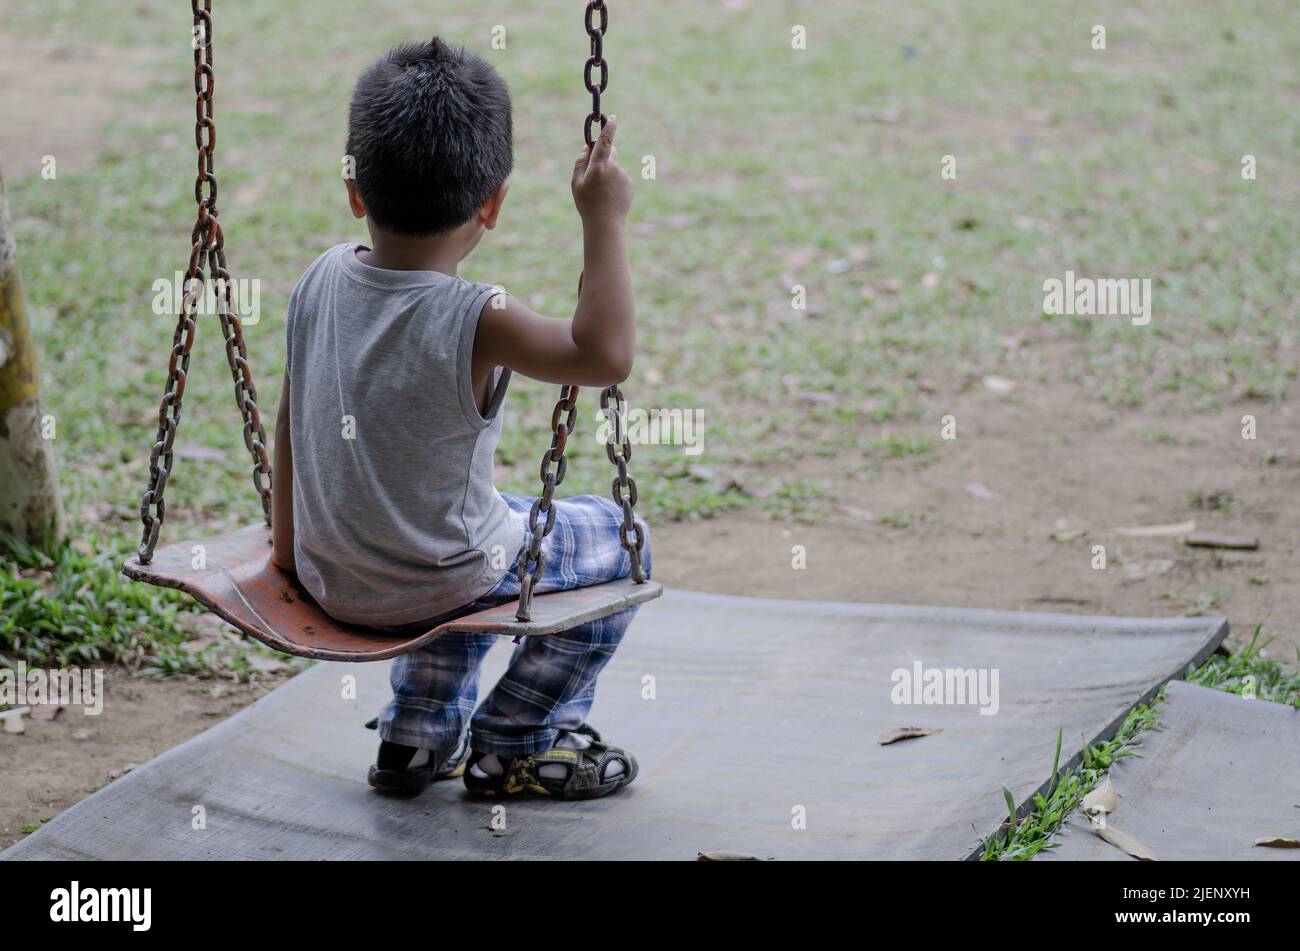 boy alone on a swing looking far, not showing his face only his back Stock Photo